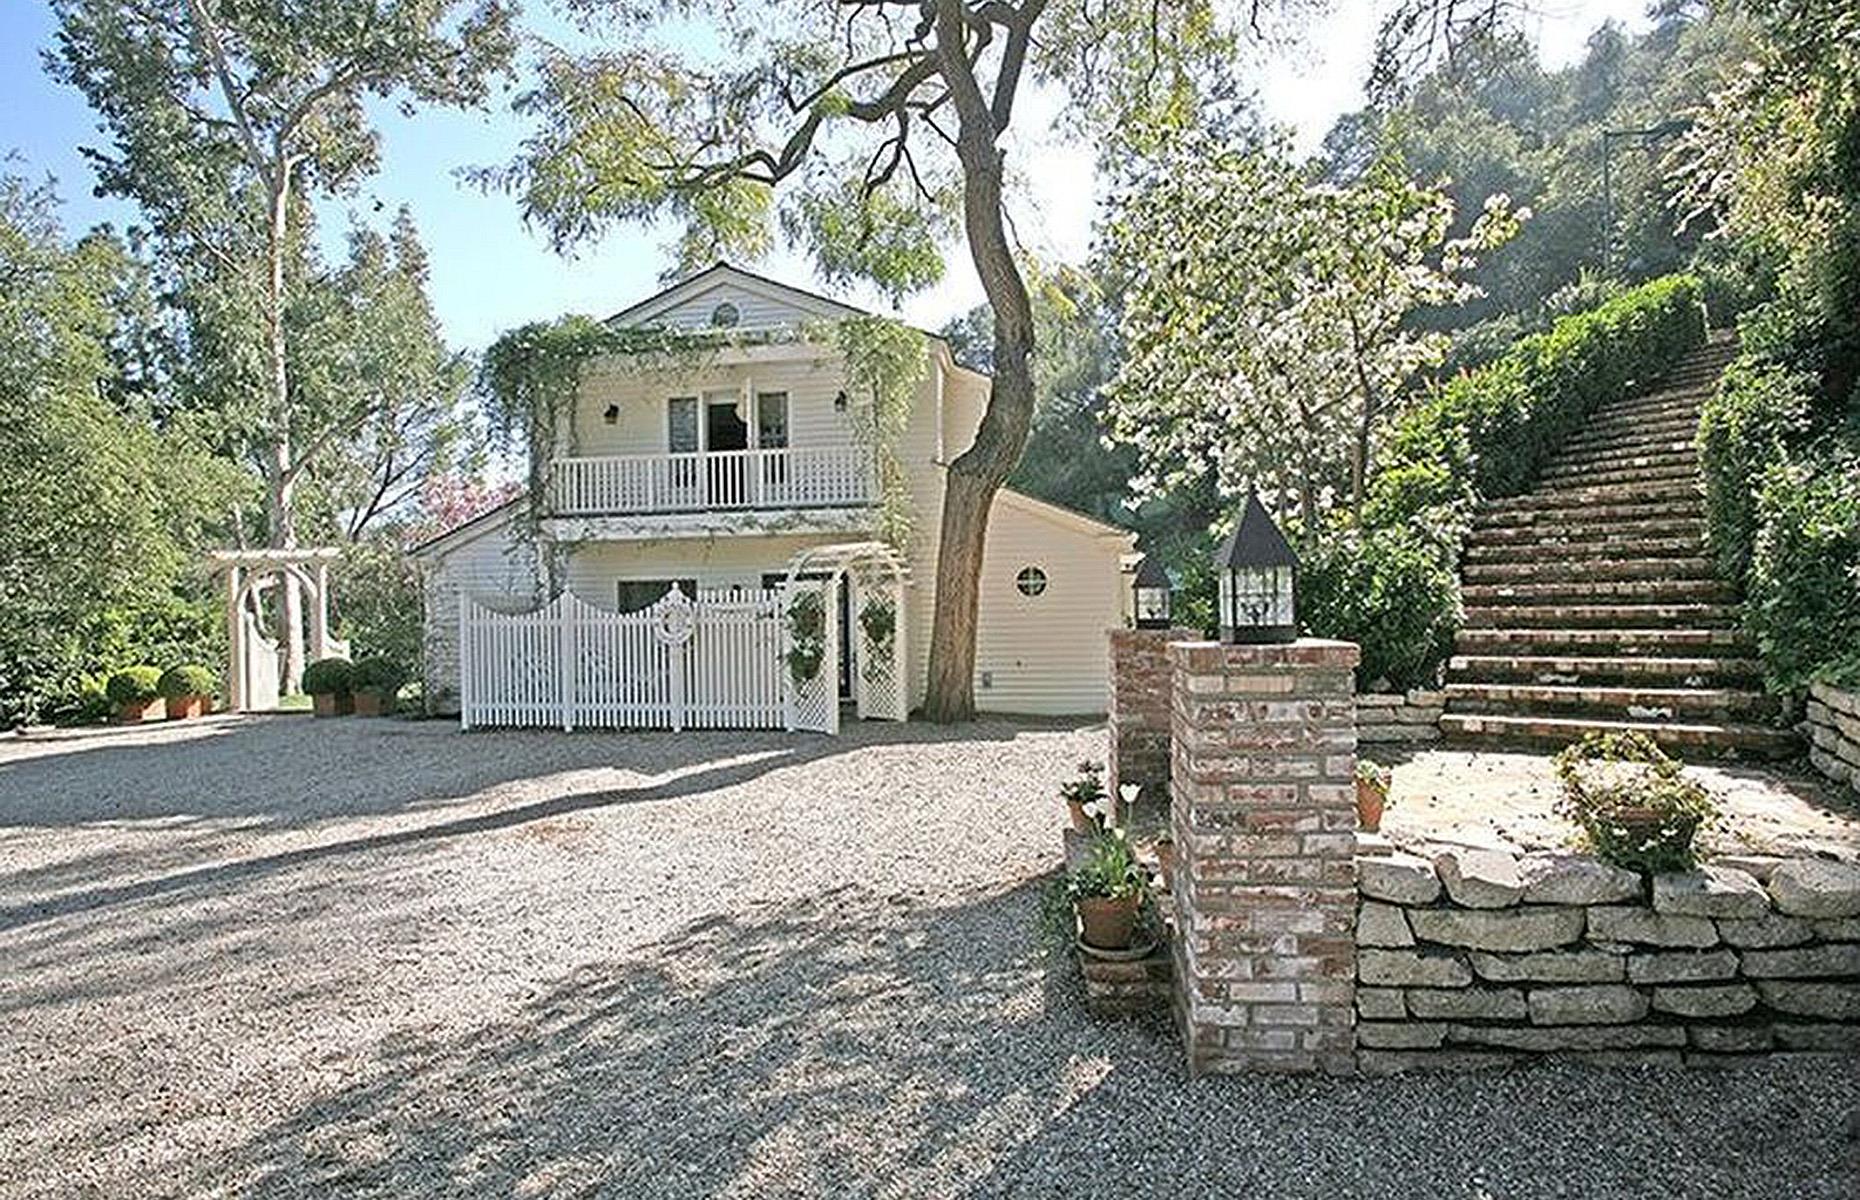 Taylor Swift's Cape Cod-style Beverly Hills home